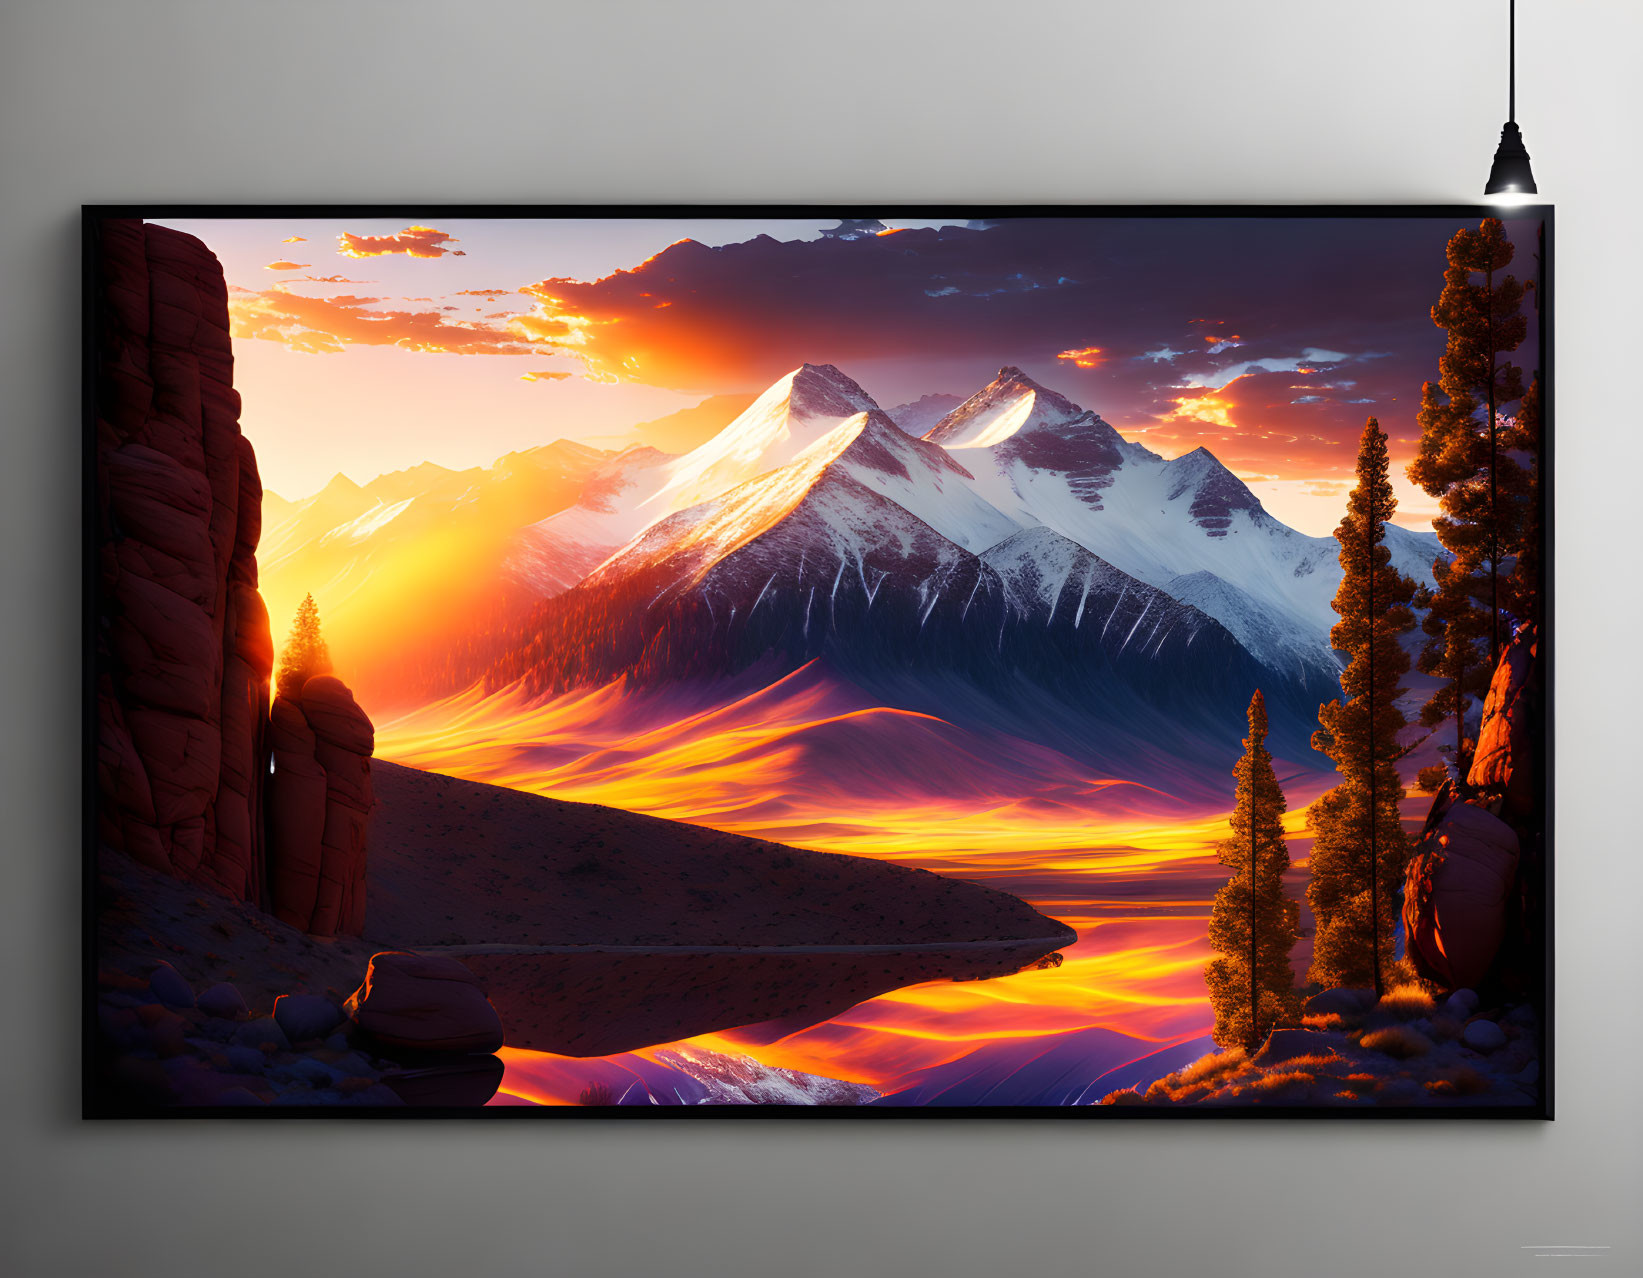 Digital artwork of vibrant sunset over snow-capped mountains & pine tree silhouettes